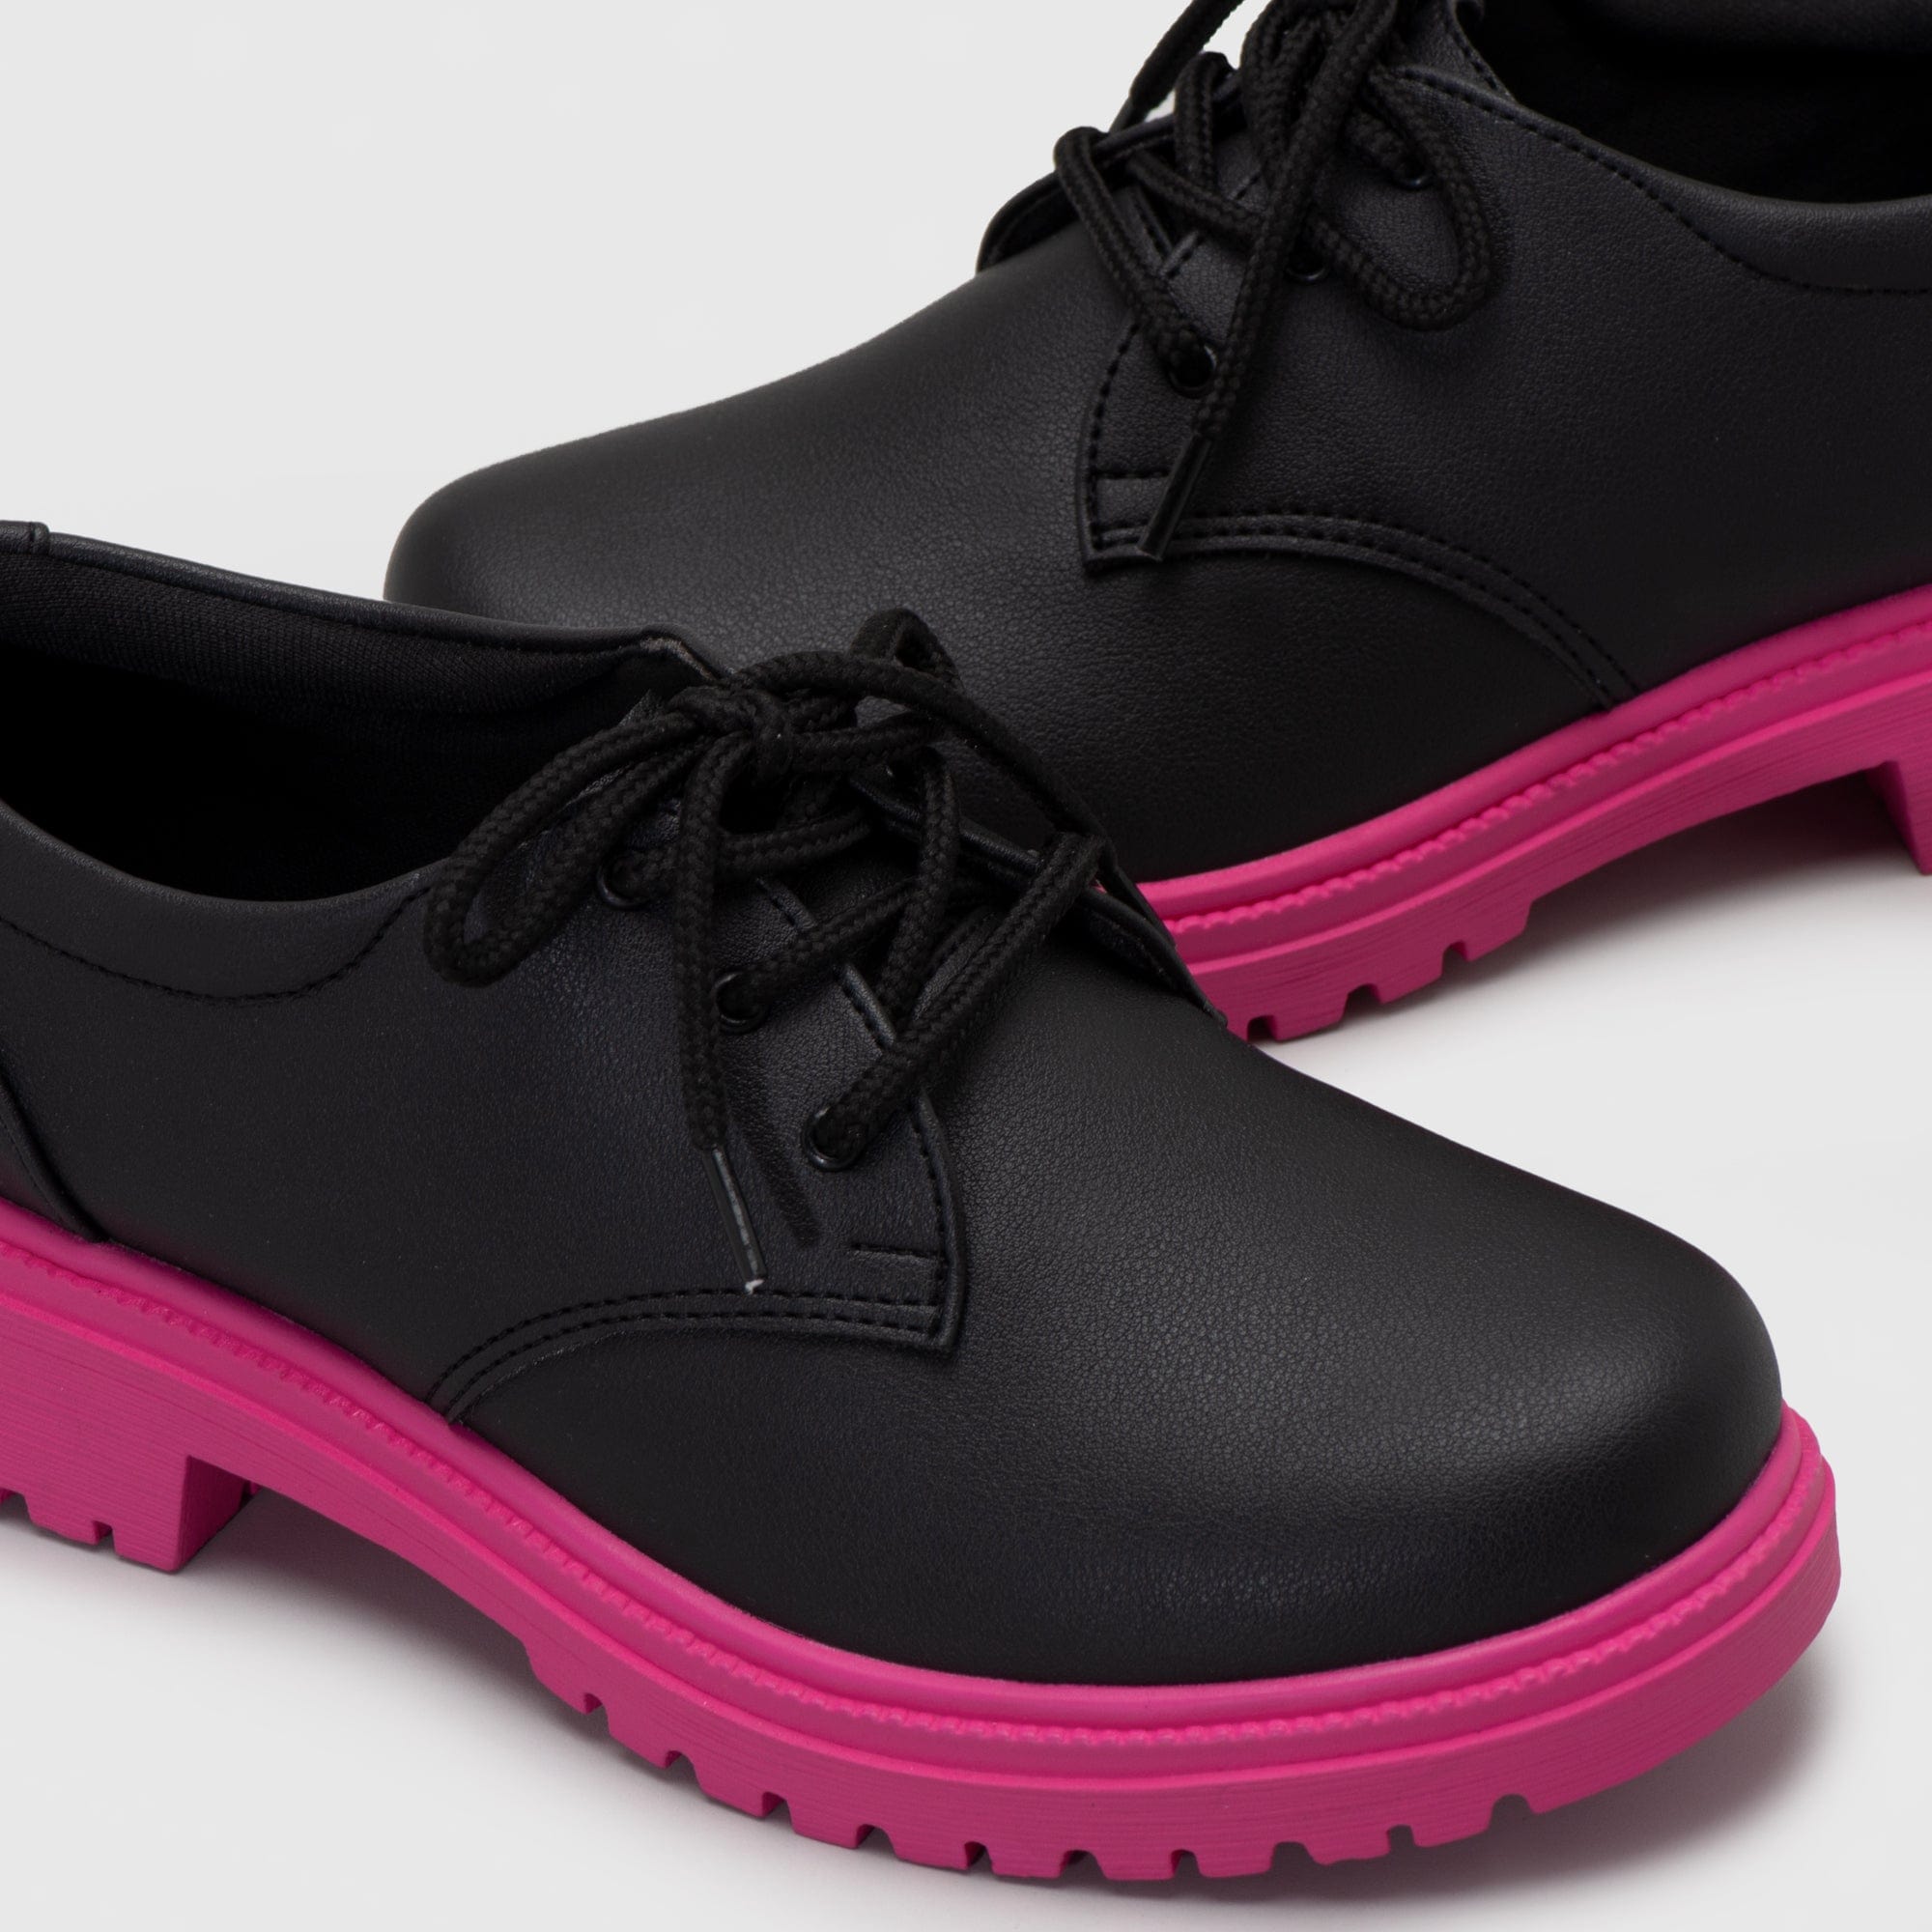 Adorable Projects Official Adorableprojects - Vailey Oxford Matte Fuchsia - Derby Shoes